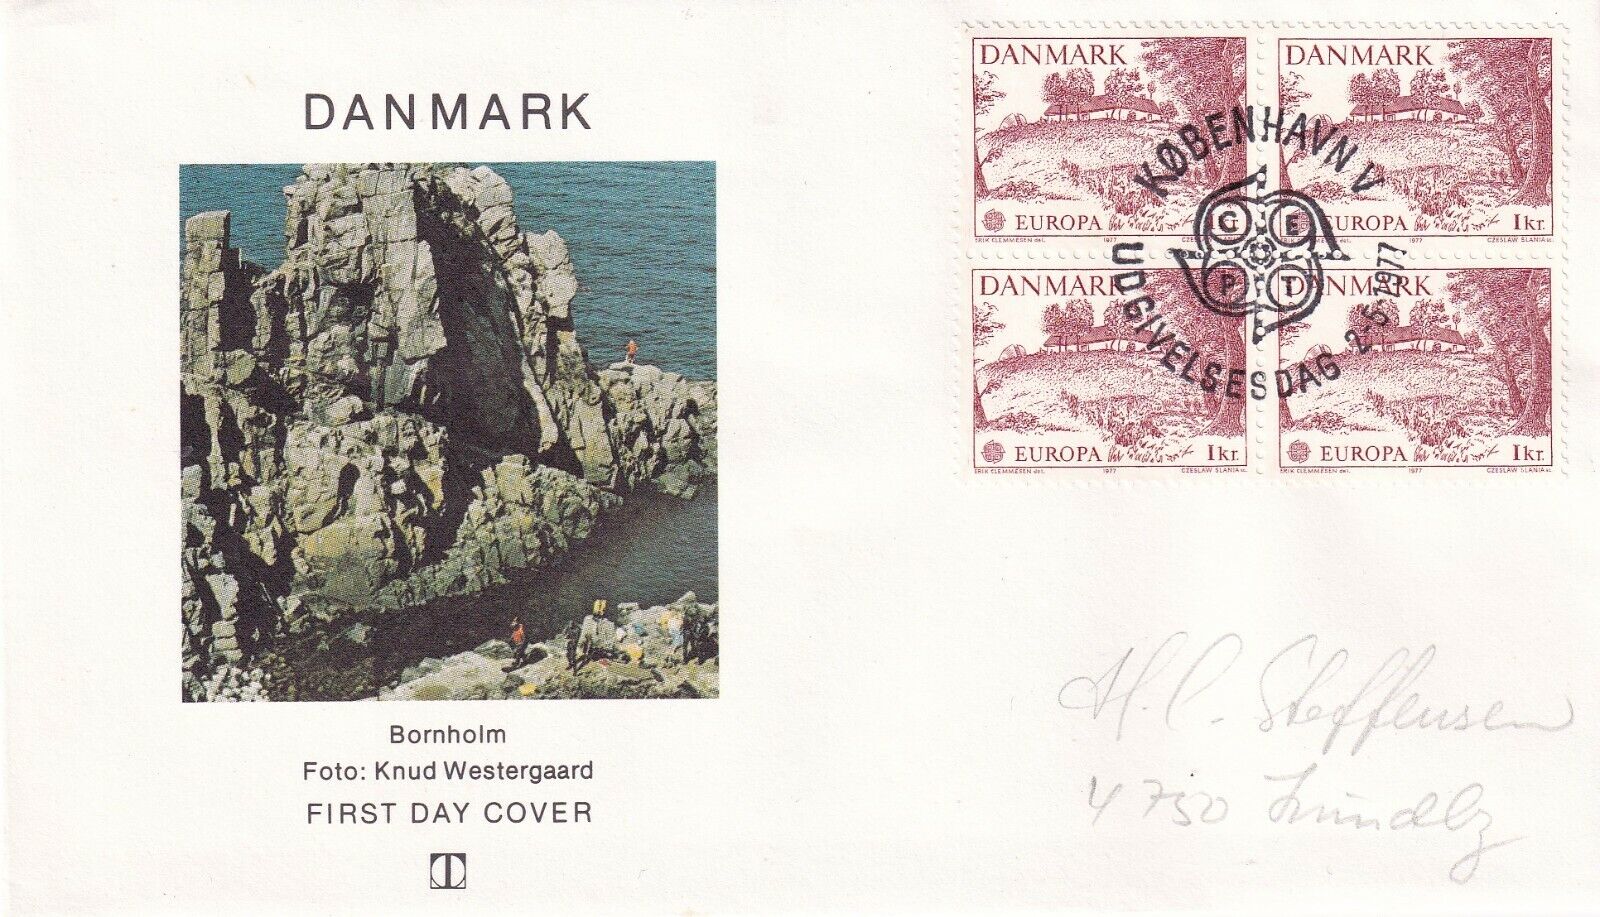 DENMARK 1977 FIRST DAY COVER High order Max 65% OFF ALLINGE EUROPA